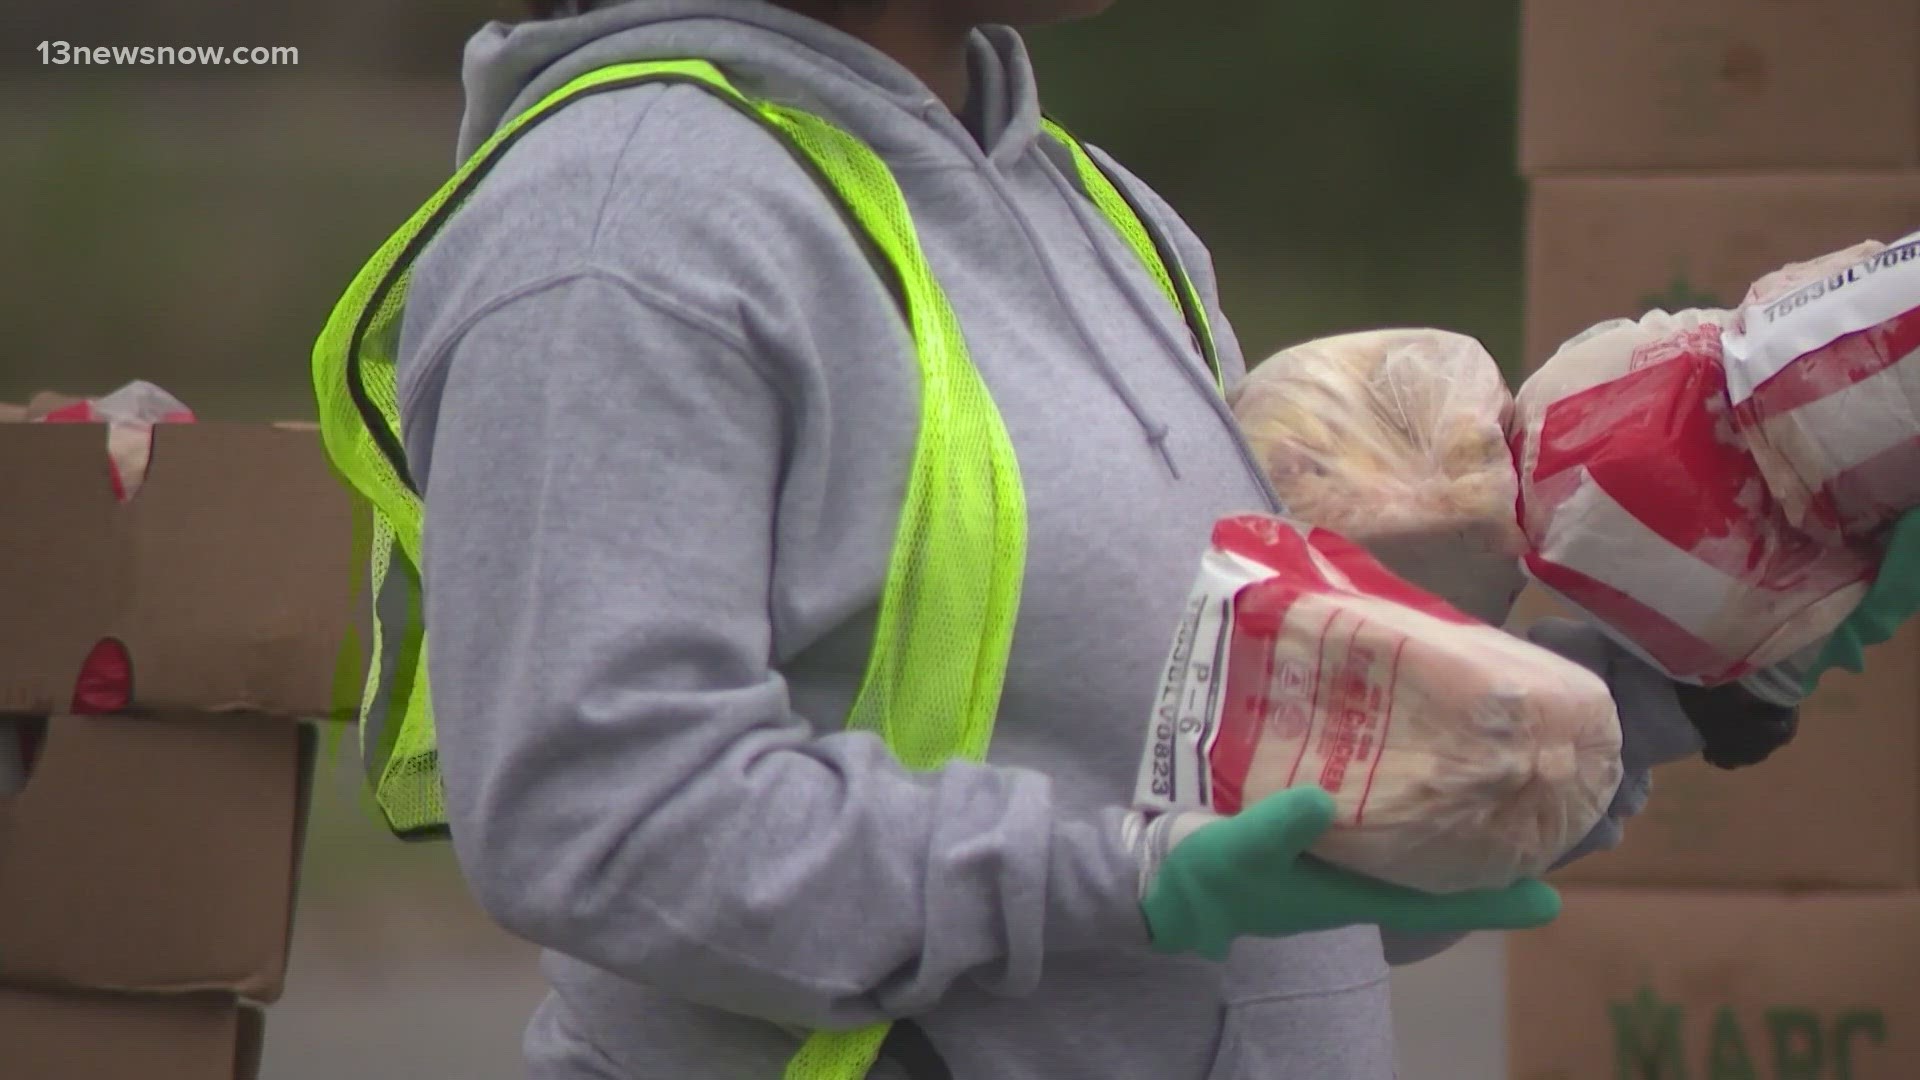 Today, the Virginia Peninsula Foodbank handed out food to people in need.